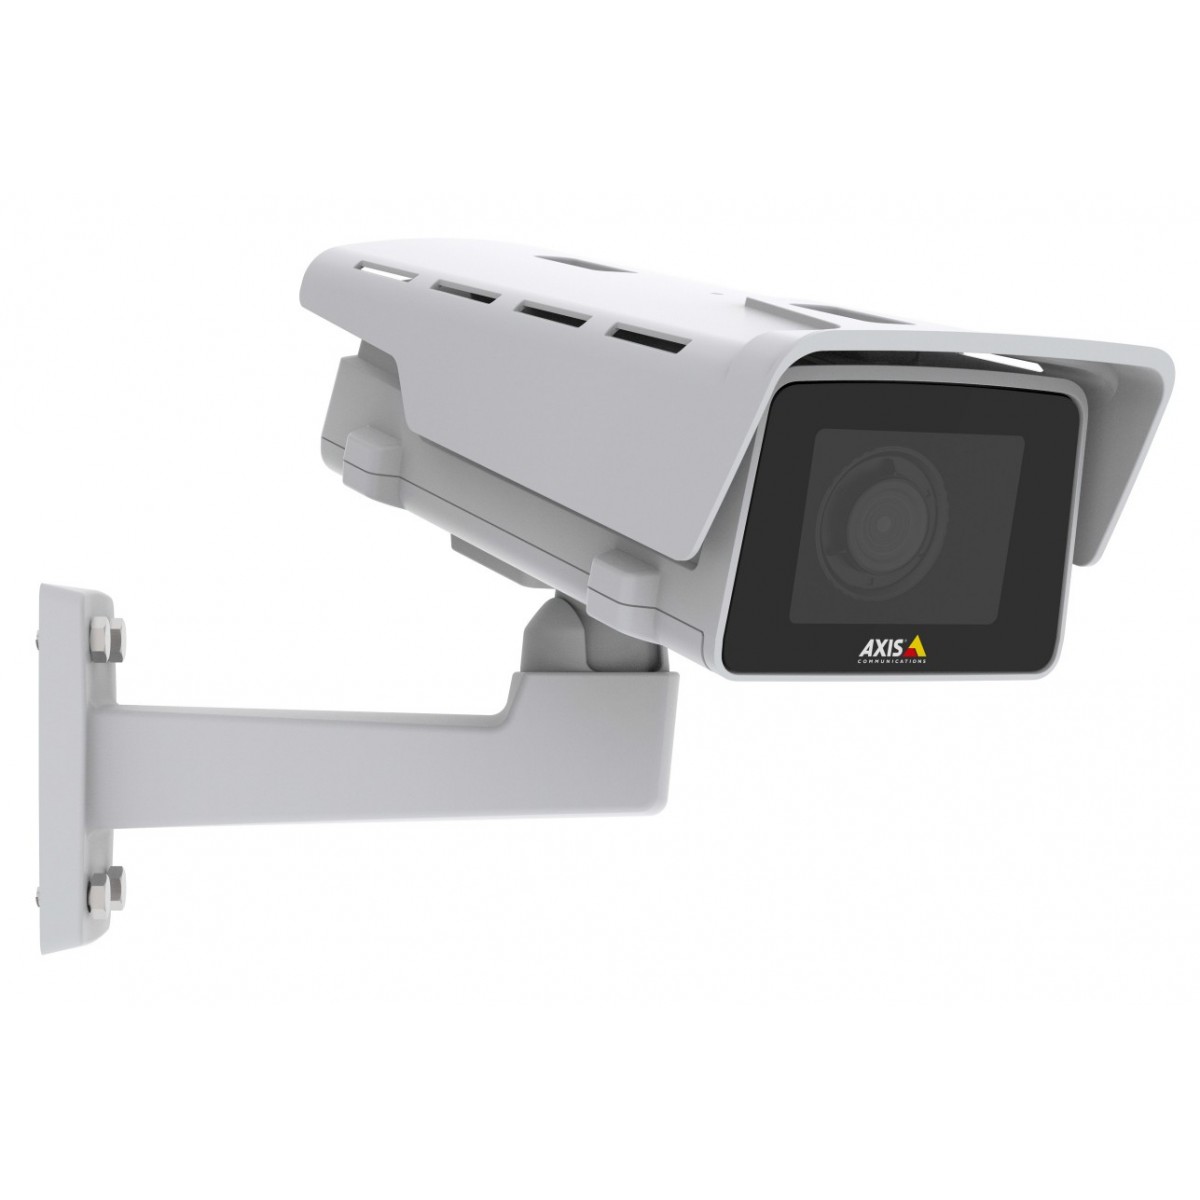 Axis M1137-E - IP security camera - Outdoor - Wired - Simplified Chinese - Traditional Chinese - German - English - Spanish - Fr